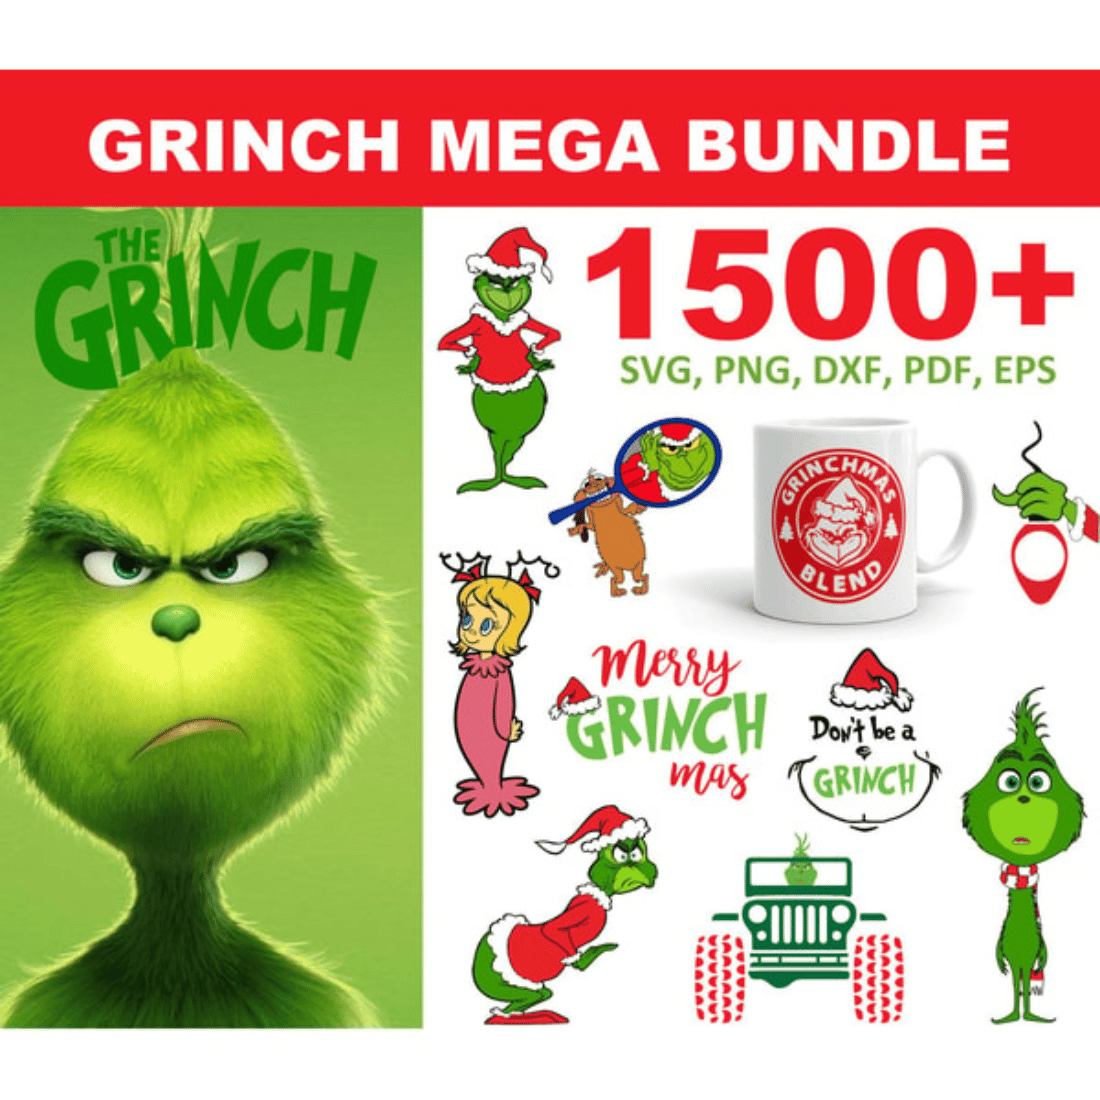 The Grinch SVG, Grinch Face SVG, Grinch Clipart, Grinch PNG, Grinch Silhouette, The Grinch Font, Grinch Hand SVG cover image.